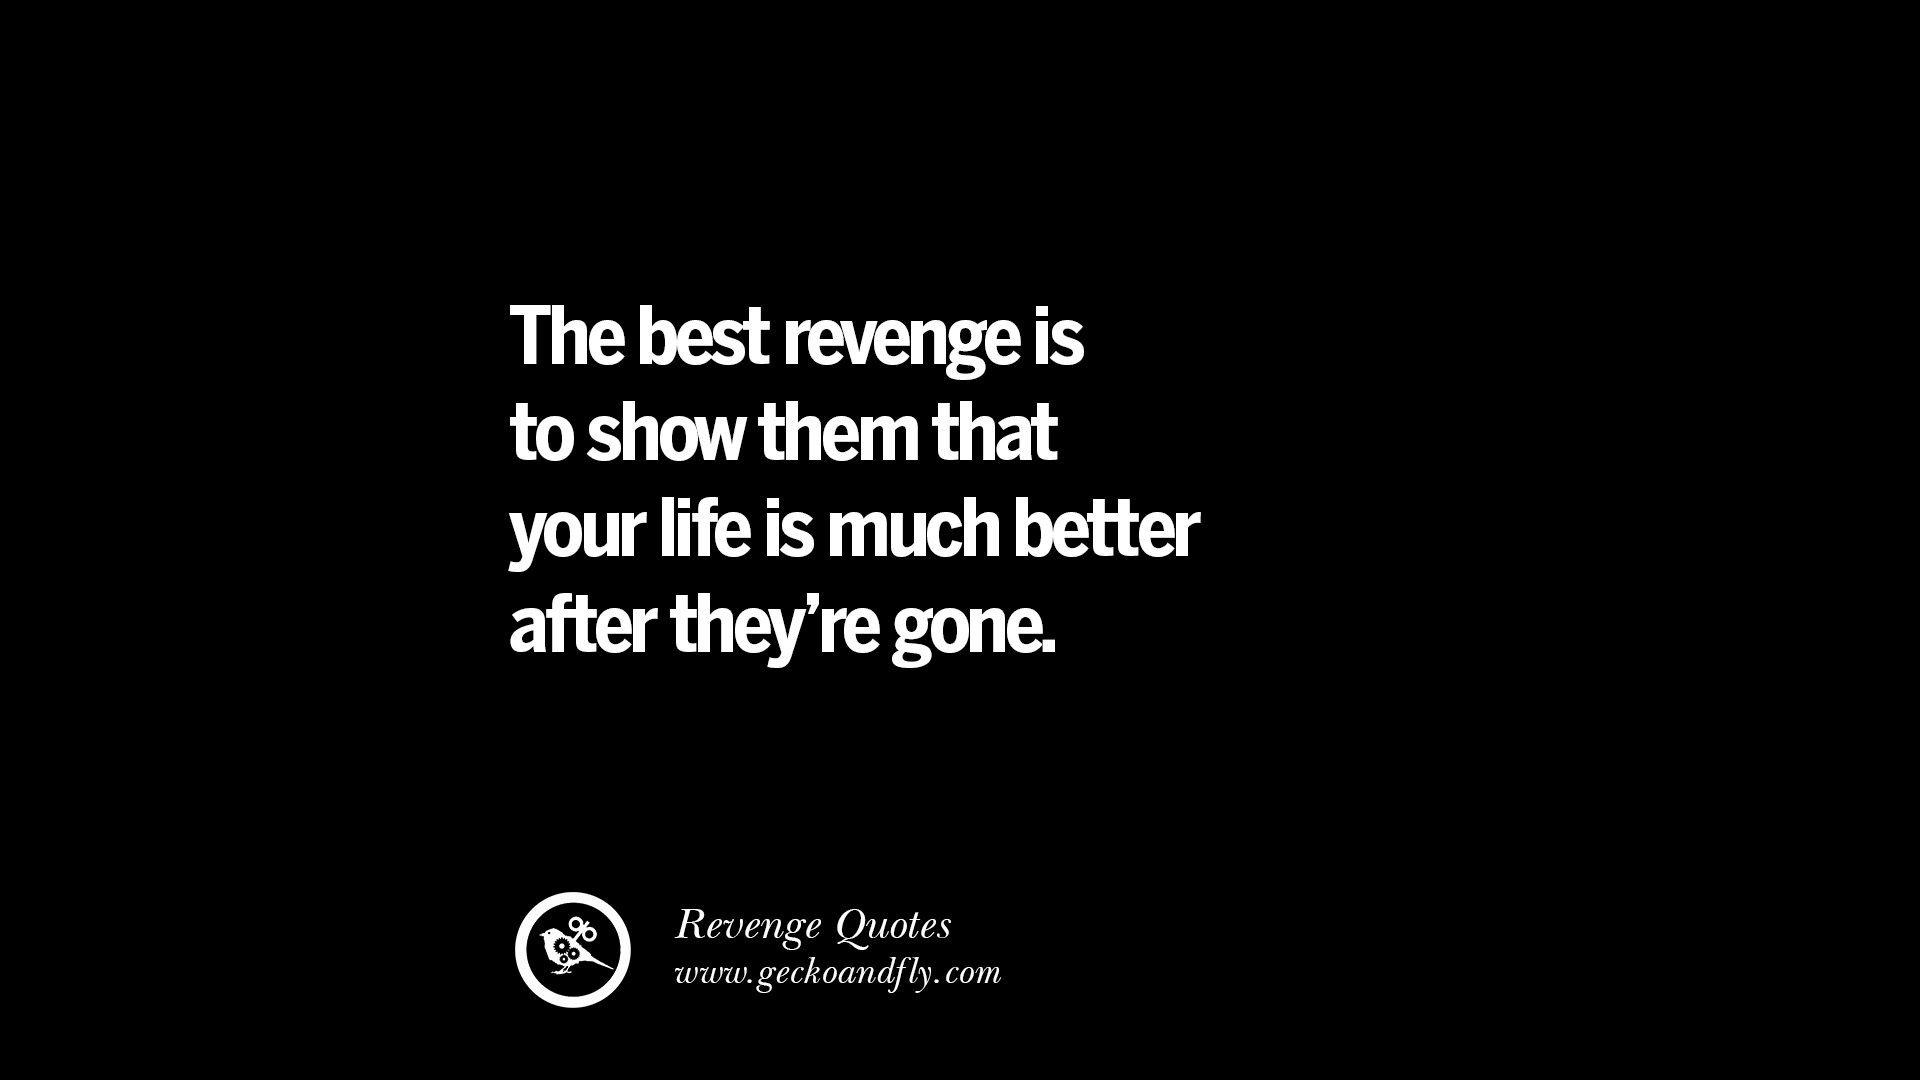 The best revenge is to show them that your life is much better after they re gone